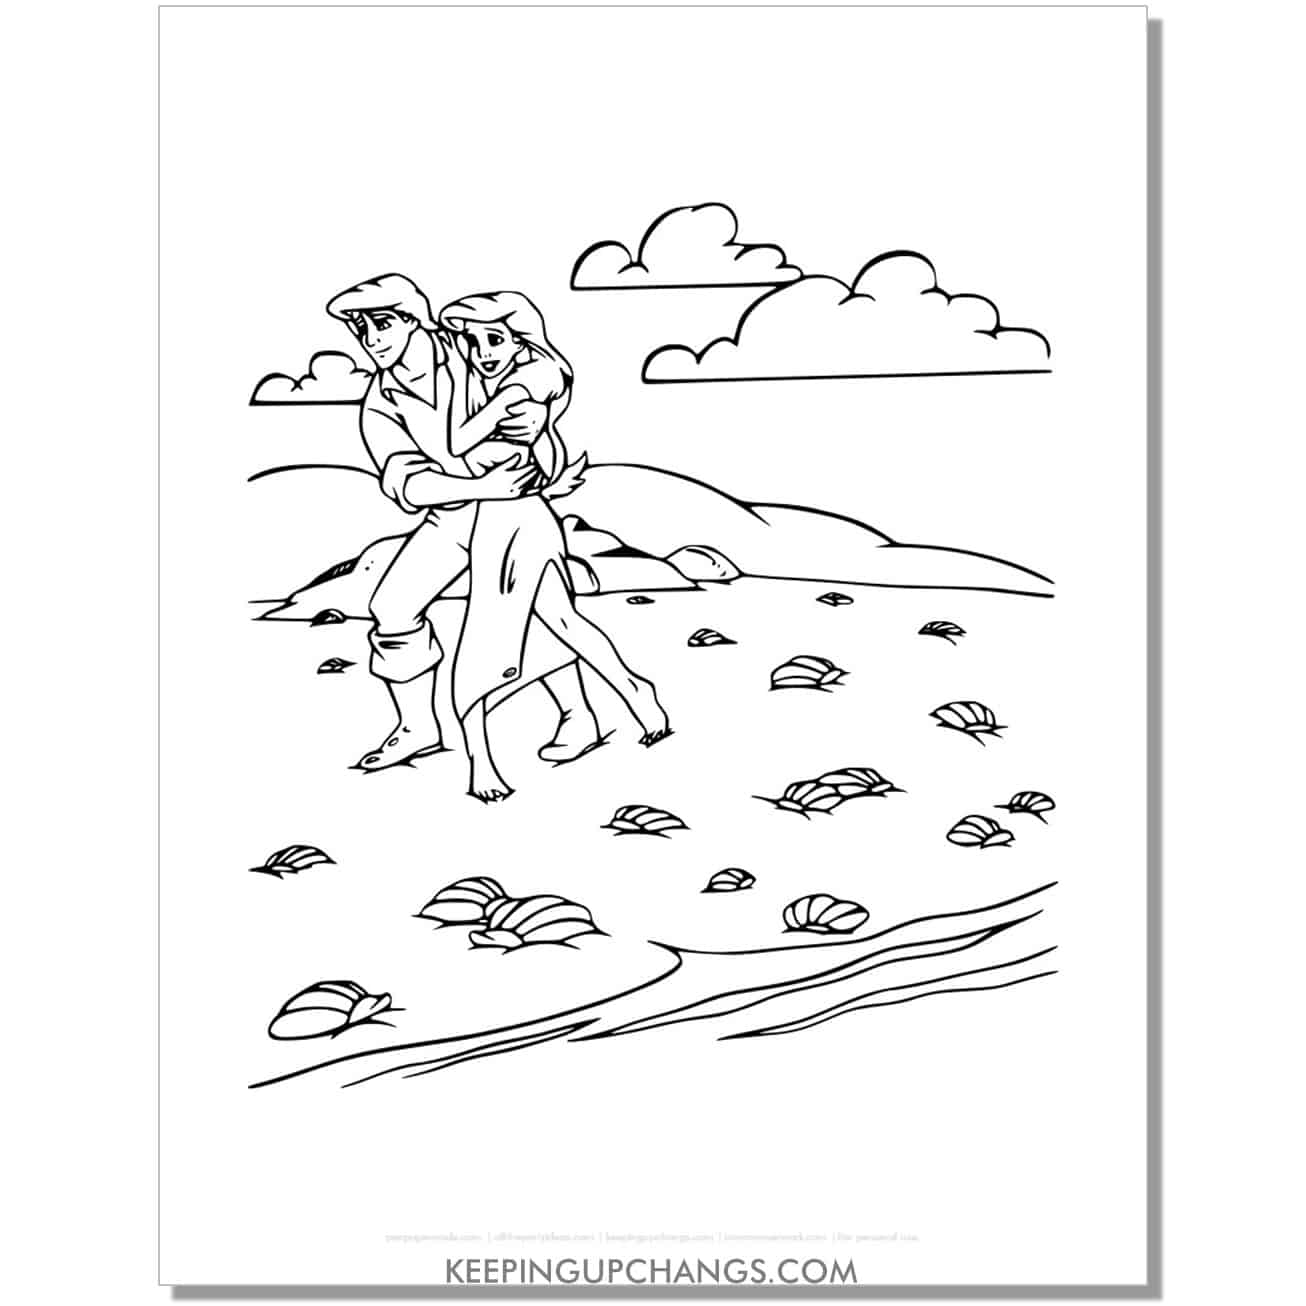 little mermaid ariel as human on land with prince eric coloring page, sheet.